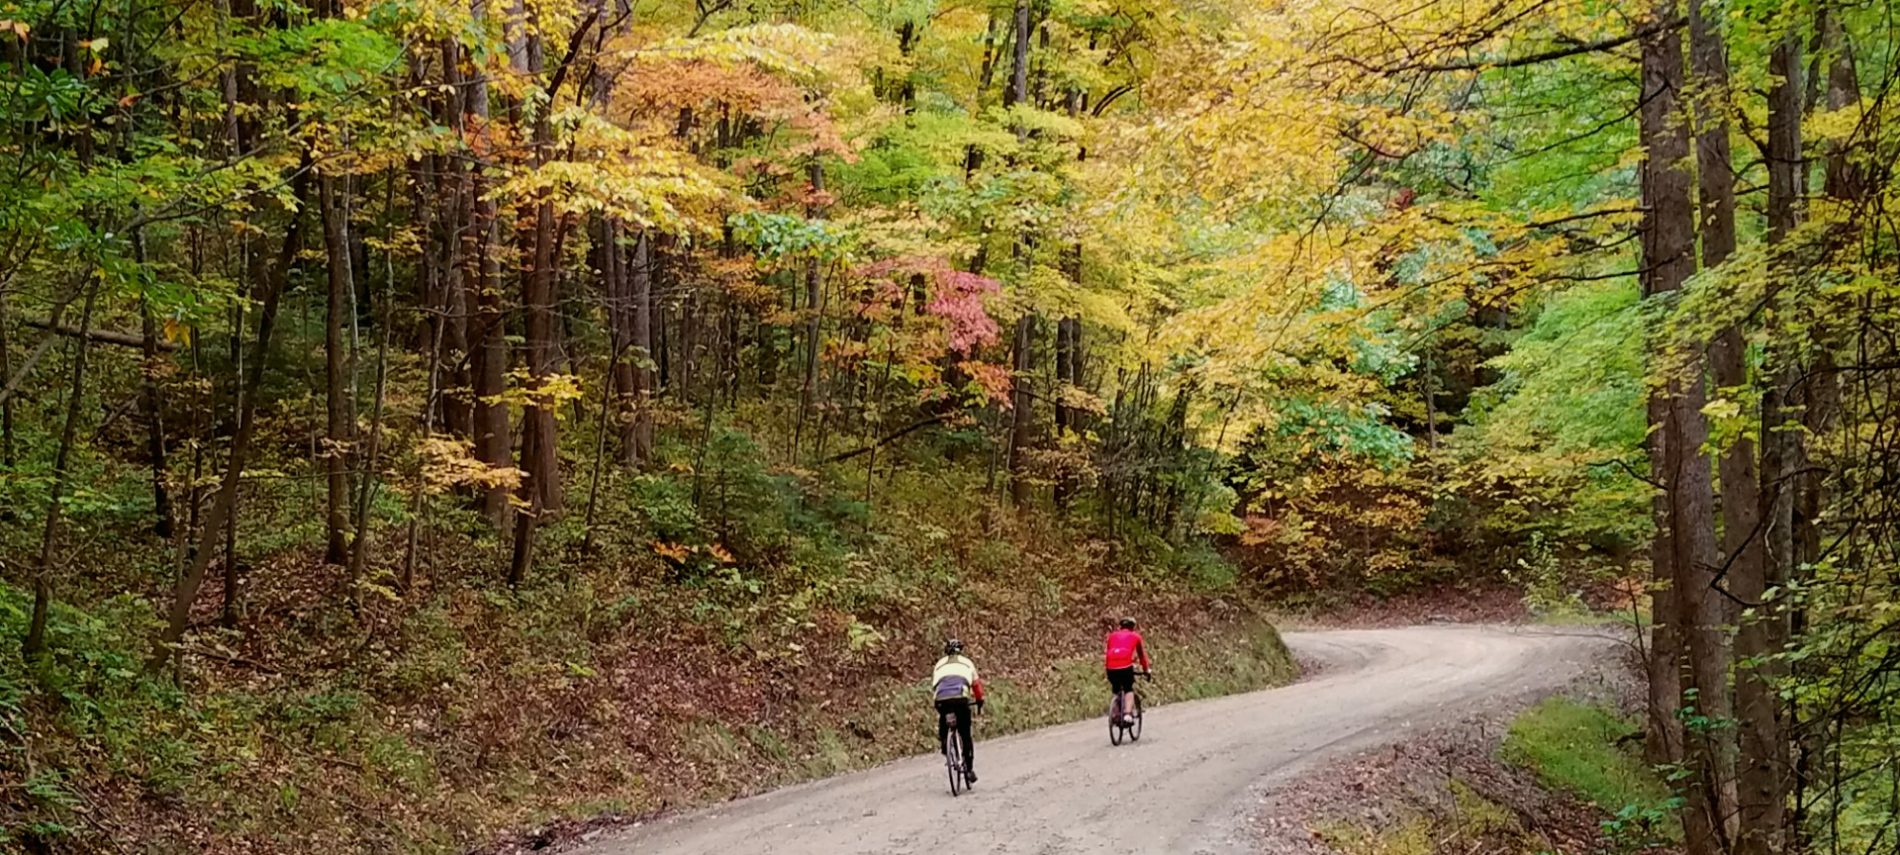 two bicyclists riding on a tree-lined dirt road